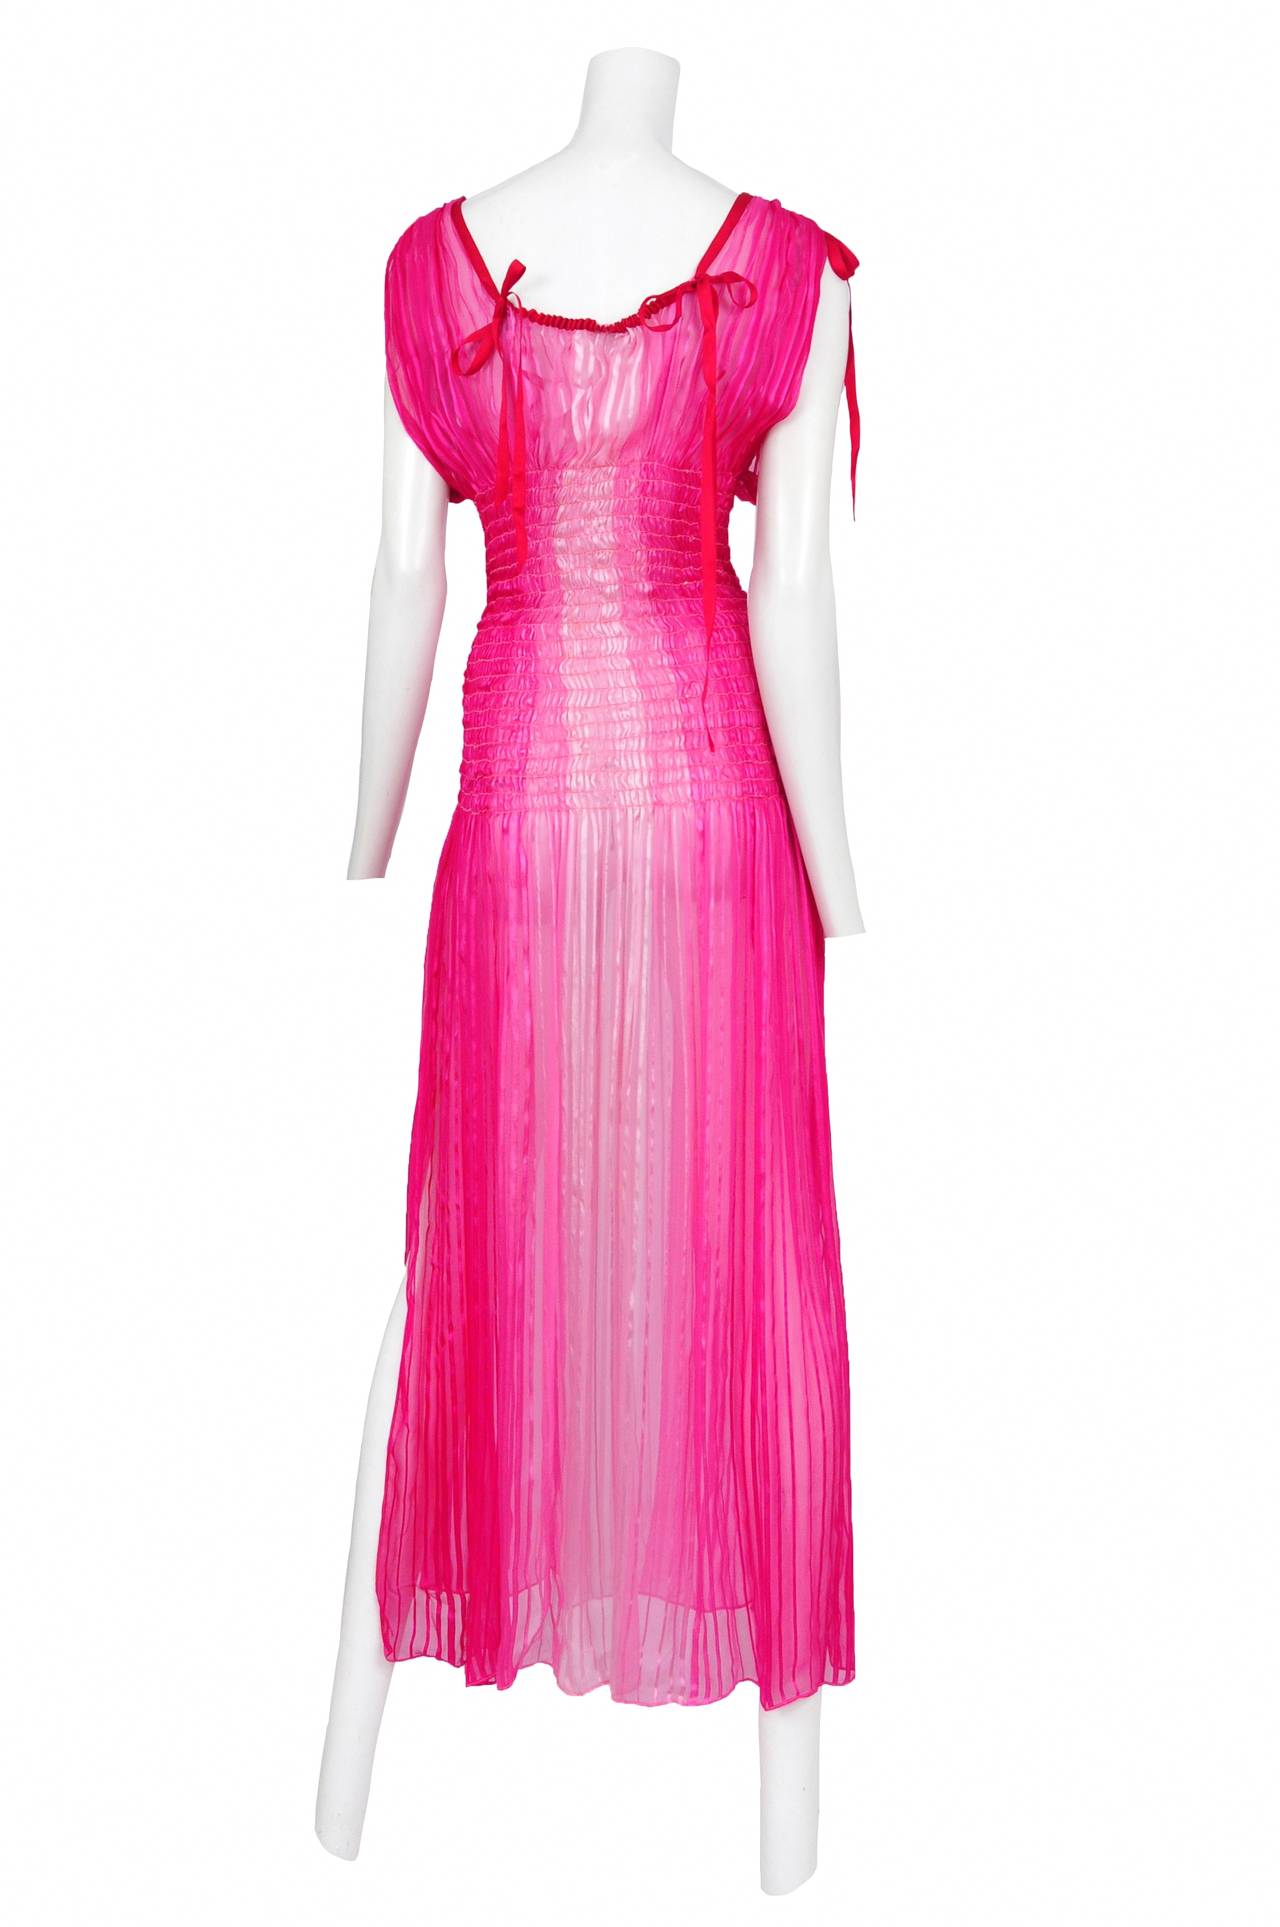 Vintage Yves Saint Laurent fuchsia ombre silk chiffon maxi dress featuring berry color ribbon trim at neckline that gathers across the chest with bows at either side. The same ribbon gathers shoulder fabric together and keeps it gathered with a bow